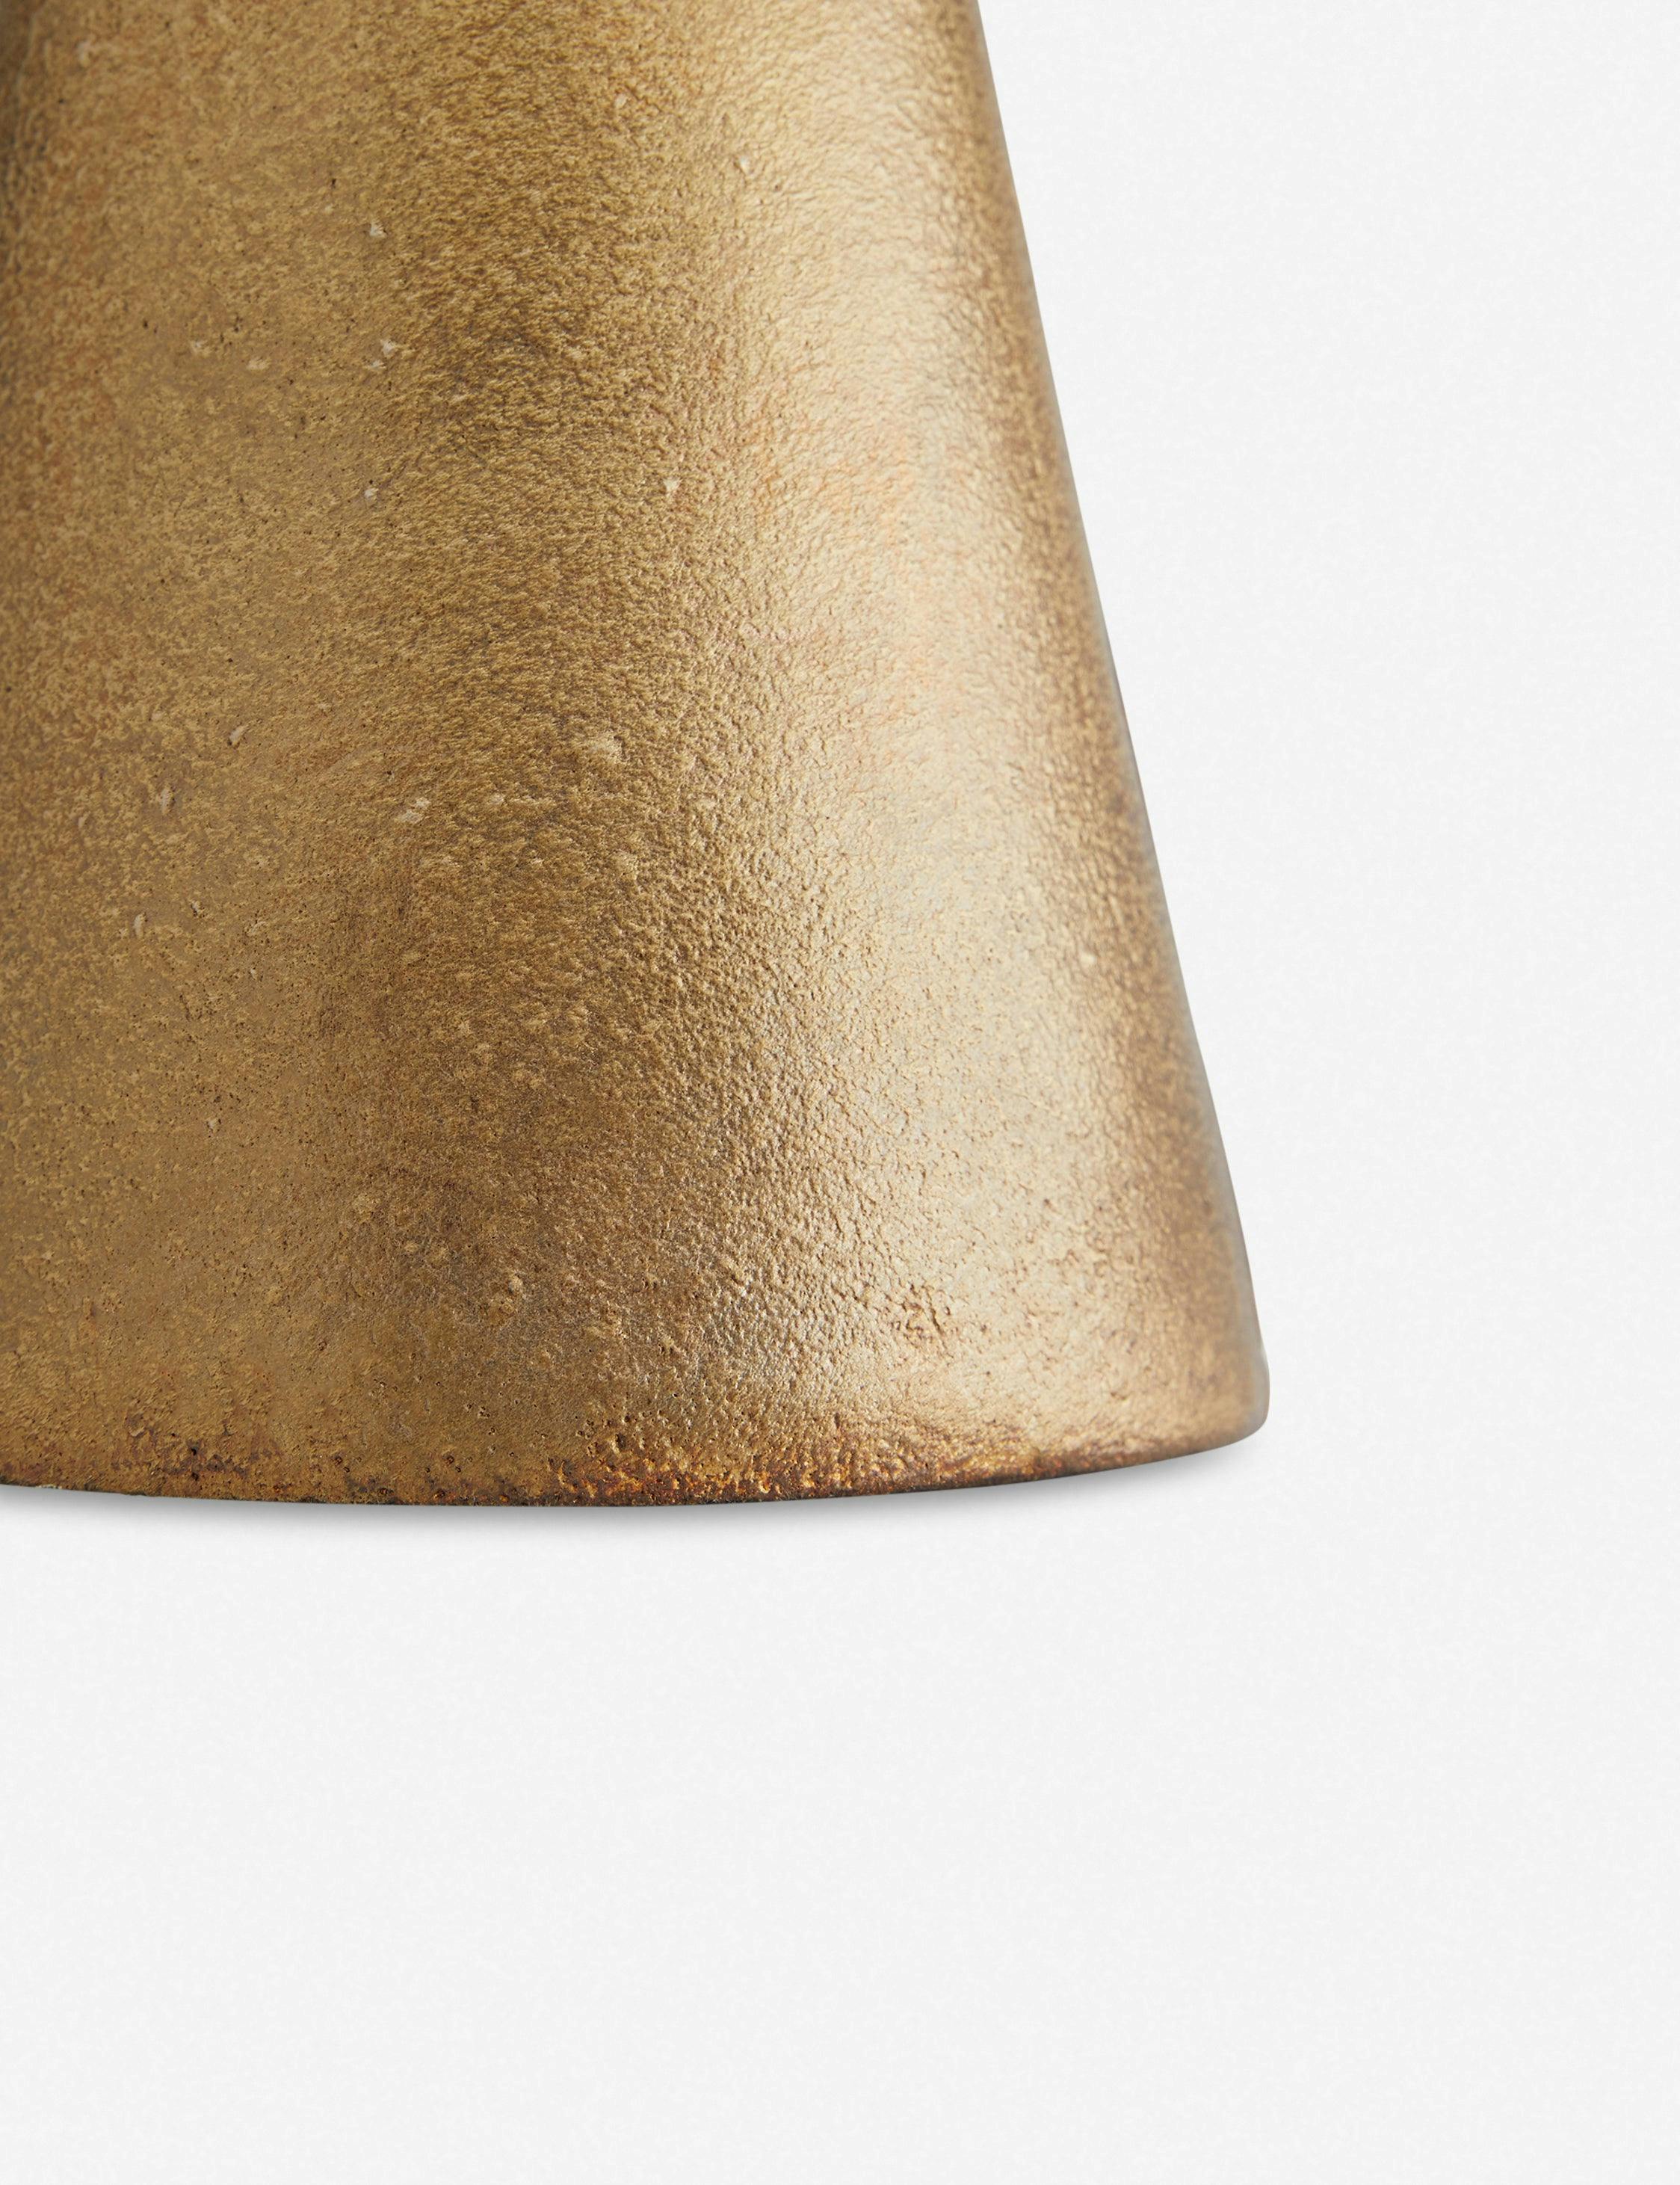 Narsi Table Lamp by Arteriors - Antique Brass